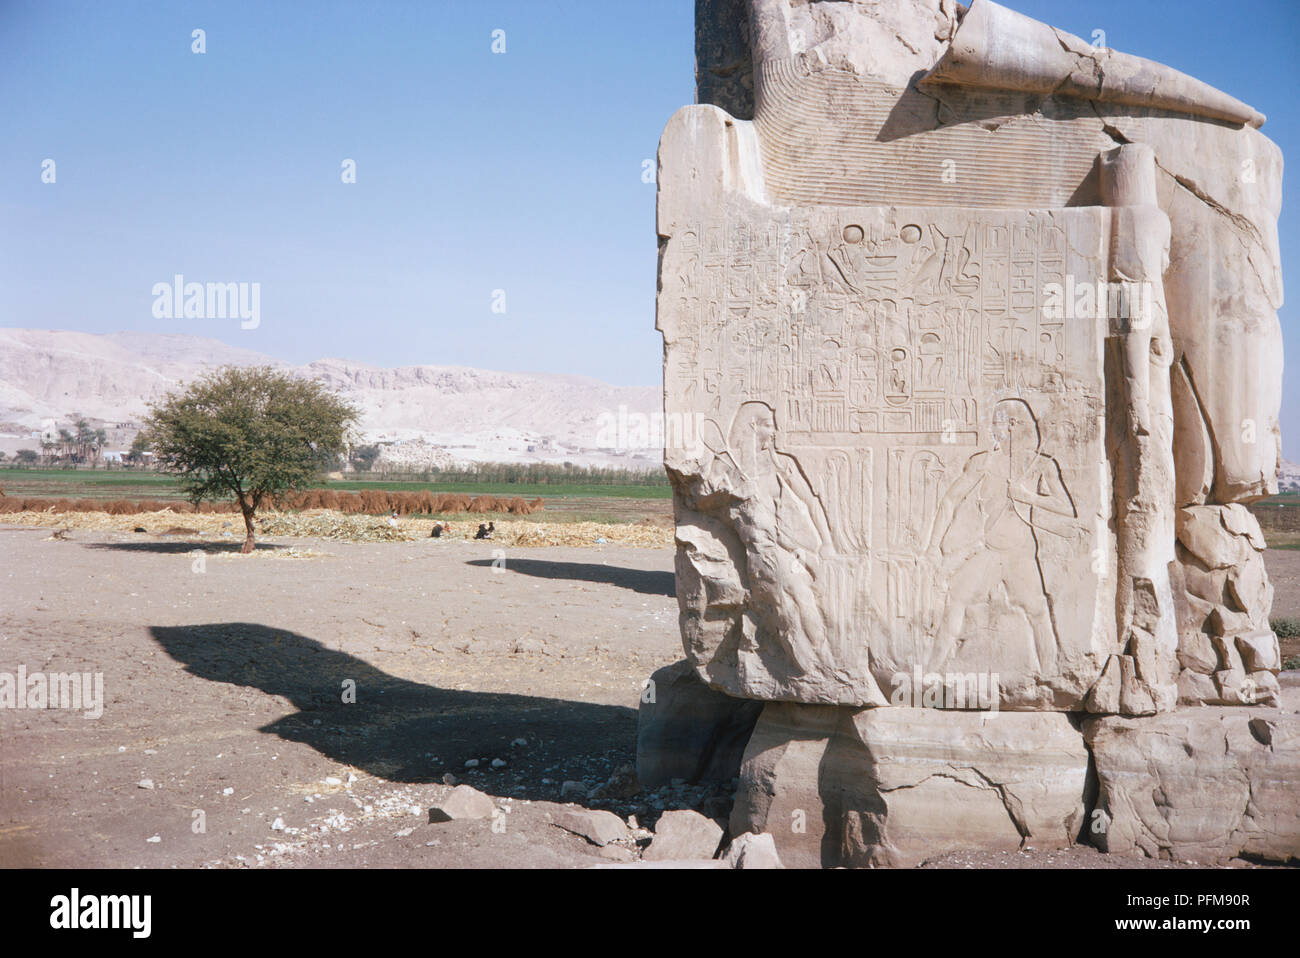 Egypt, Thebes-Luxor, detail of carved pictures and hieroglyphics on one of two Colossi of Memnon statues originally part of the mortuary temple of Amenhotep III (1417-1379 B.C.), damaged by the flooding waters of the Nile and an earthquake. Stock Photo